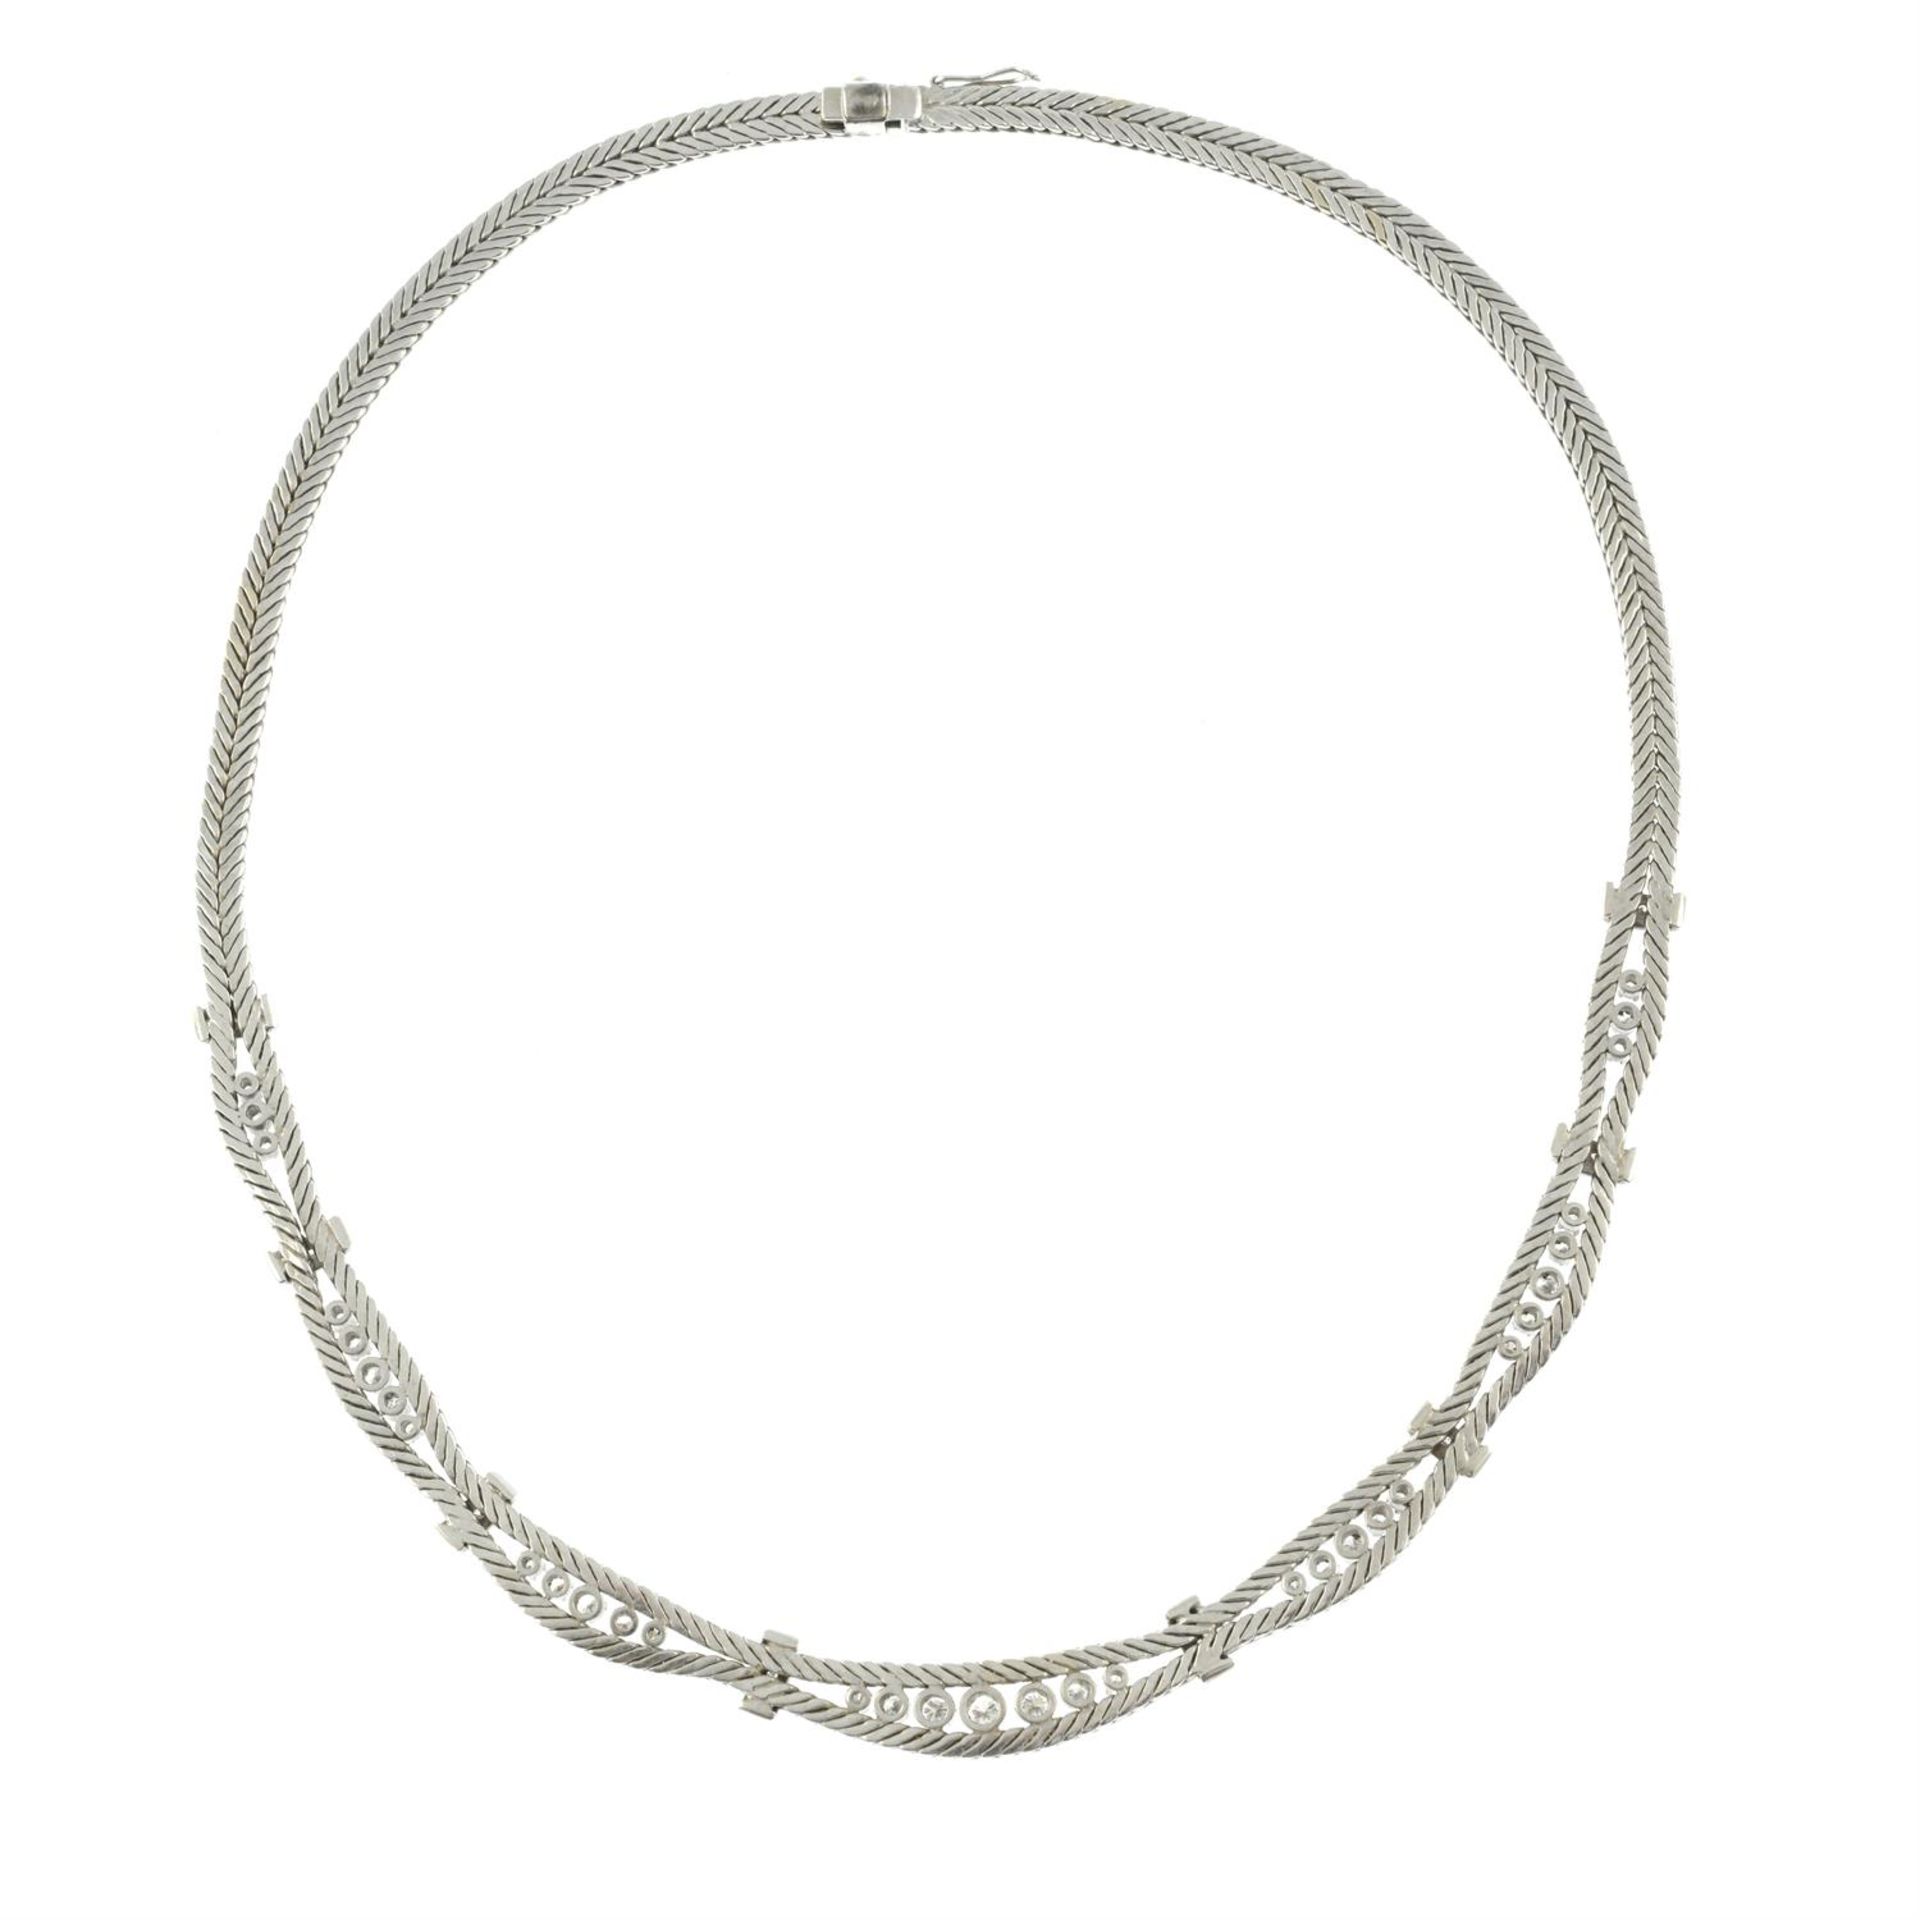 A mid 20th century 18ct gold textured herringbone-link necklace, with brilliant-cut diamond spacers. - Image 4 of 4